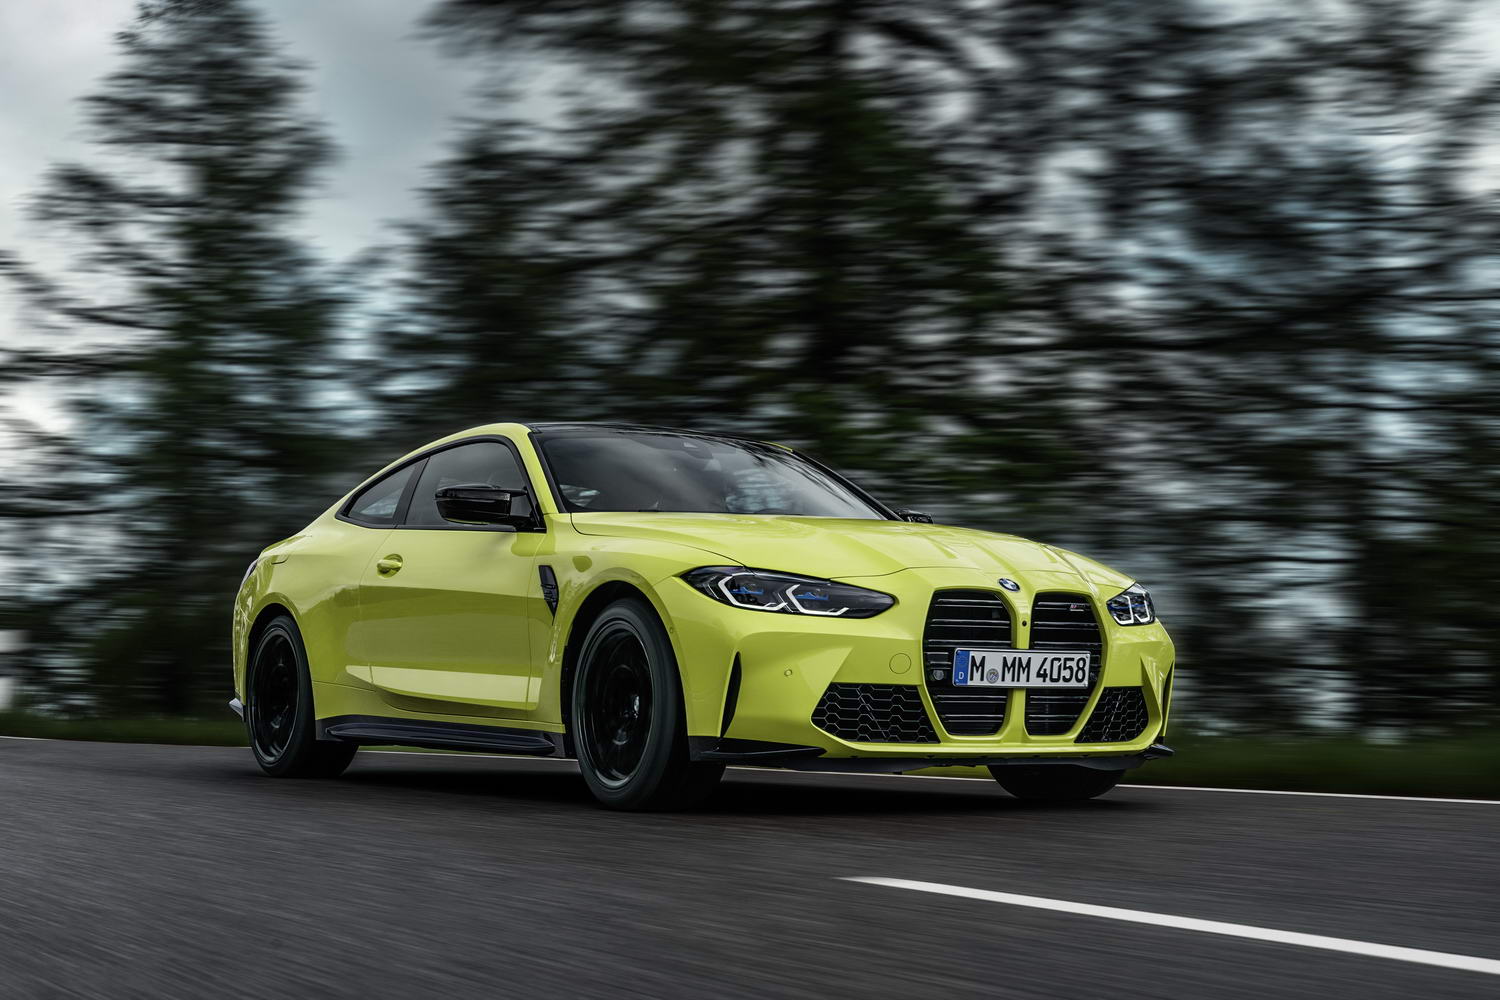 2021 BMW M4 Coupe image gallery - car and motoring news by CompleteCar.ie